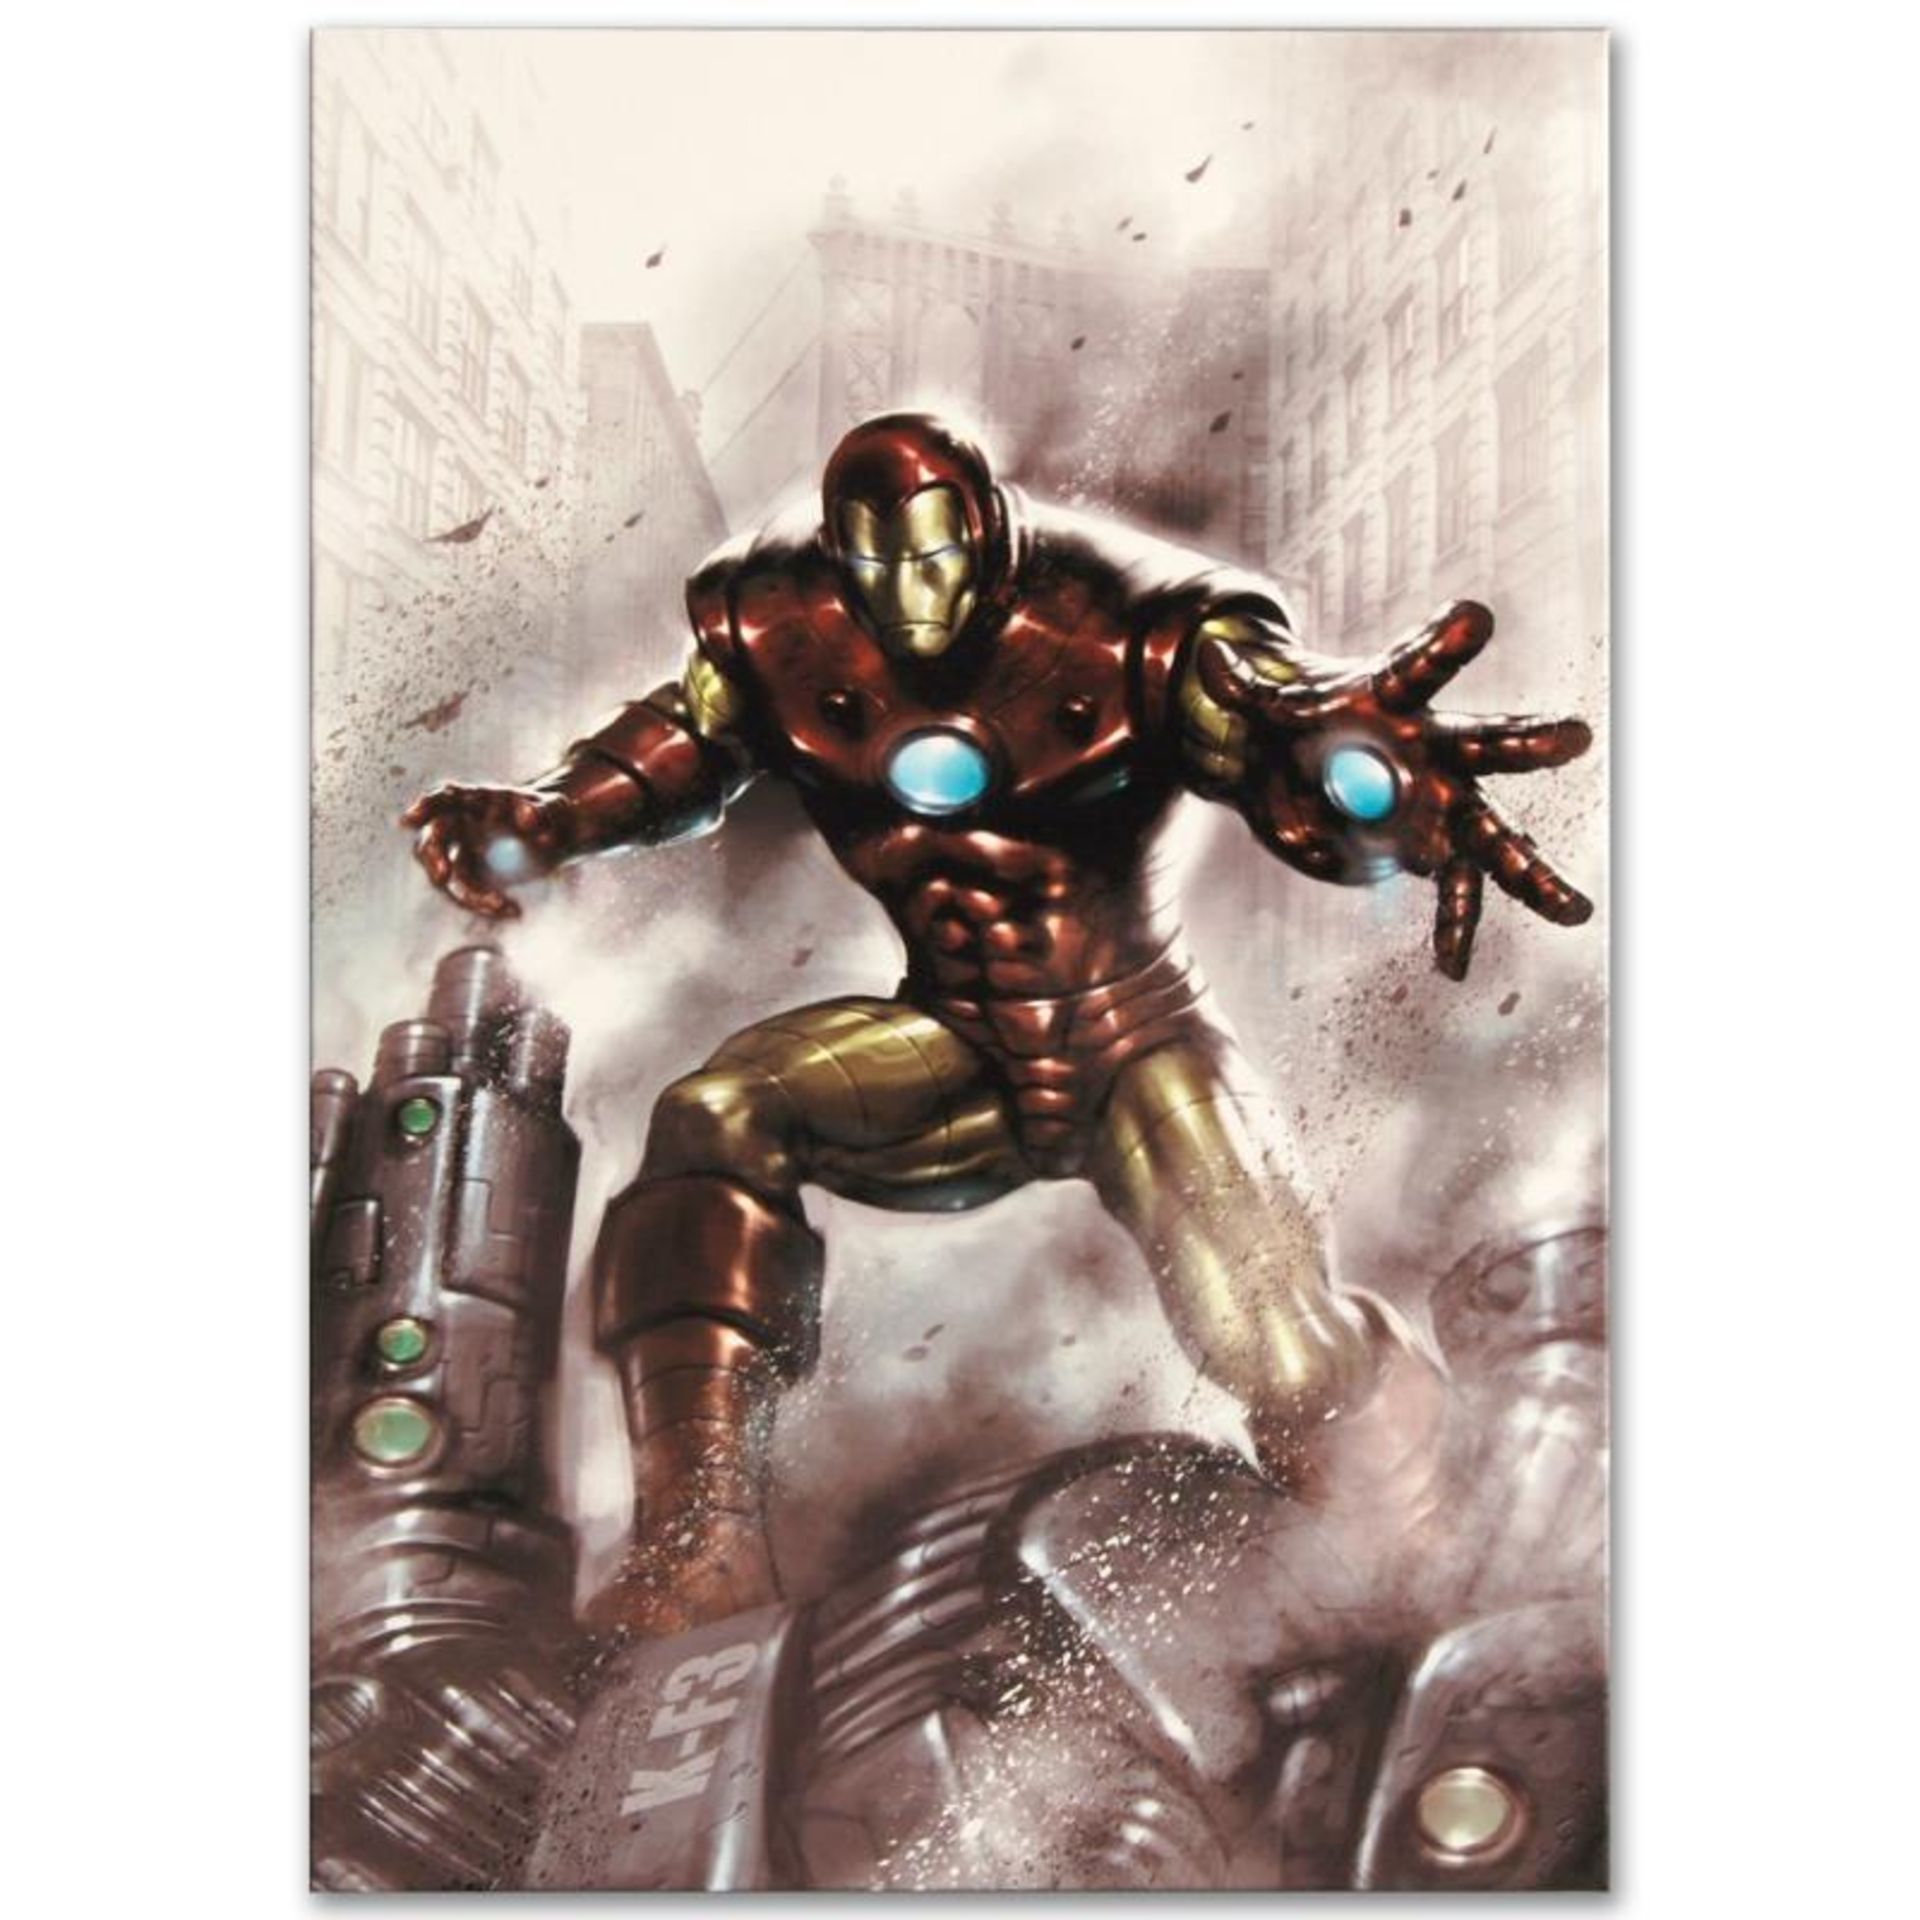 Marvel Comics "Indomitable Iron Man #1" Numbered Limited Edition Giclee on Canva